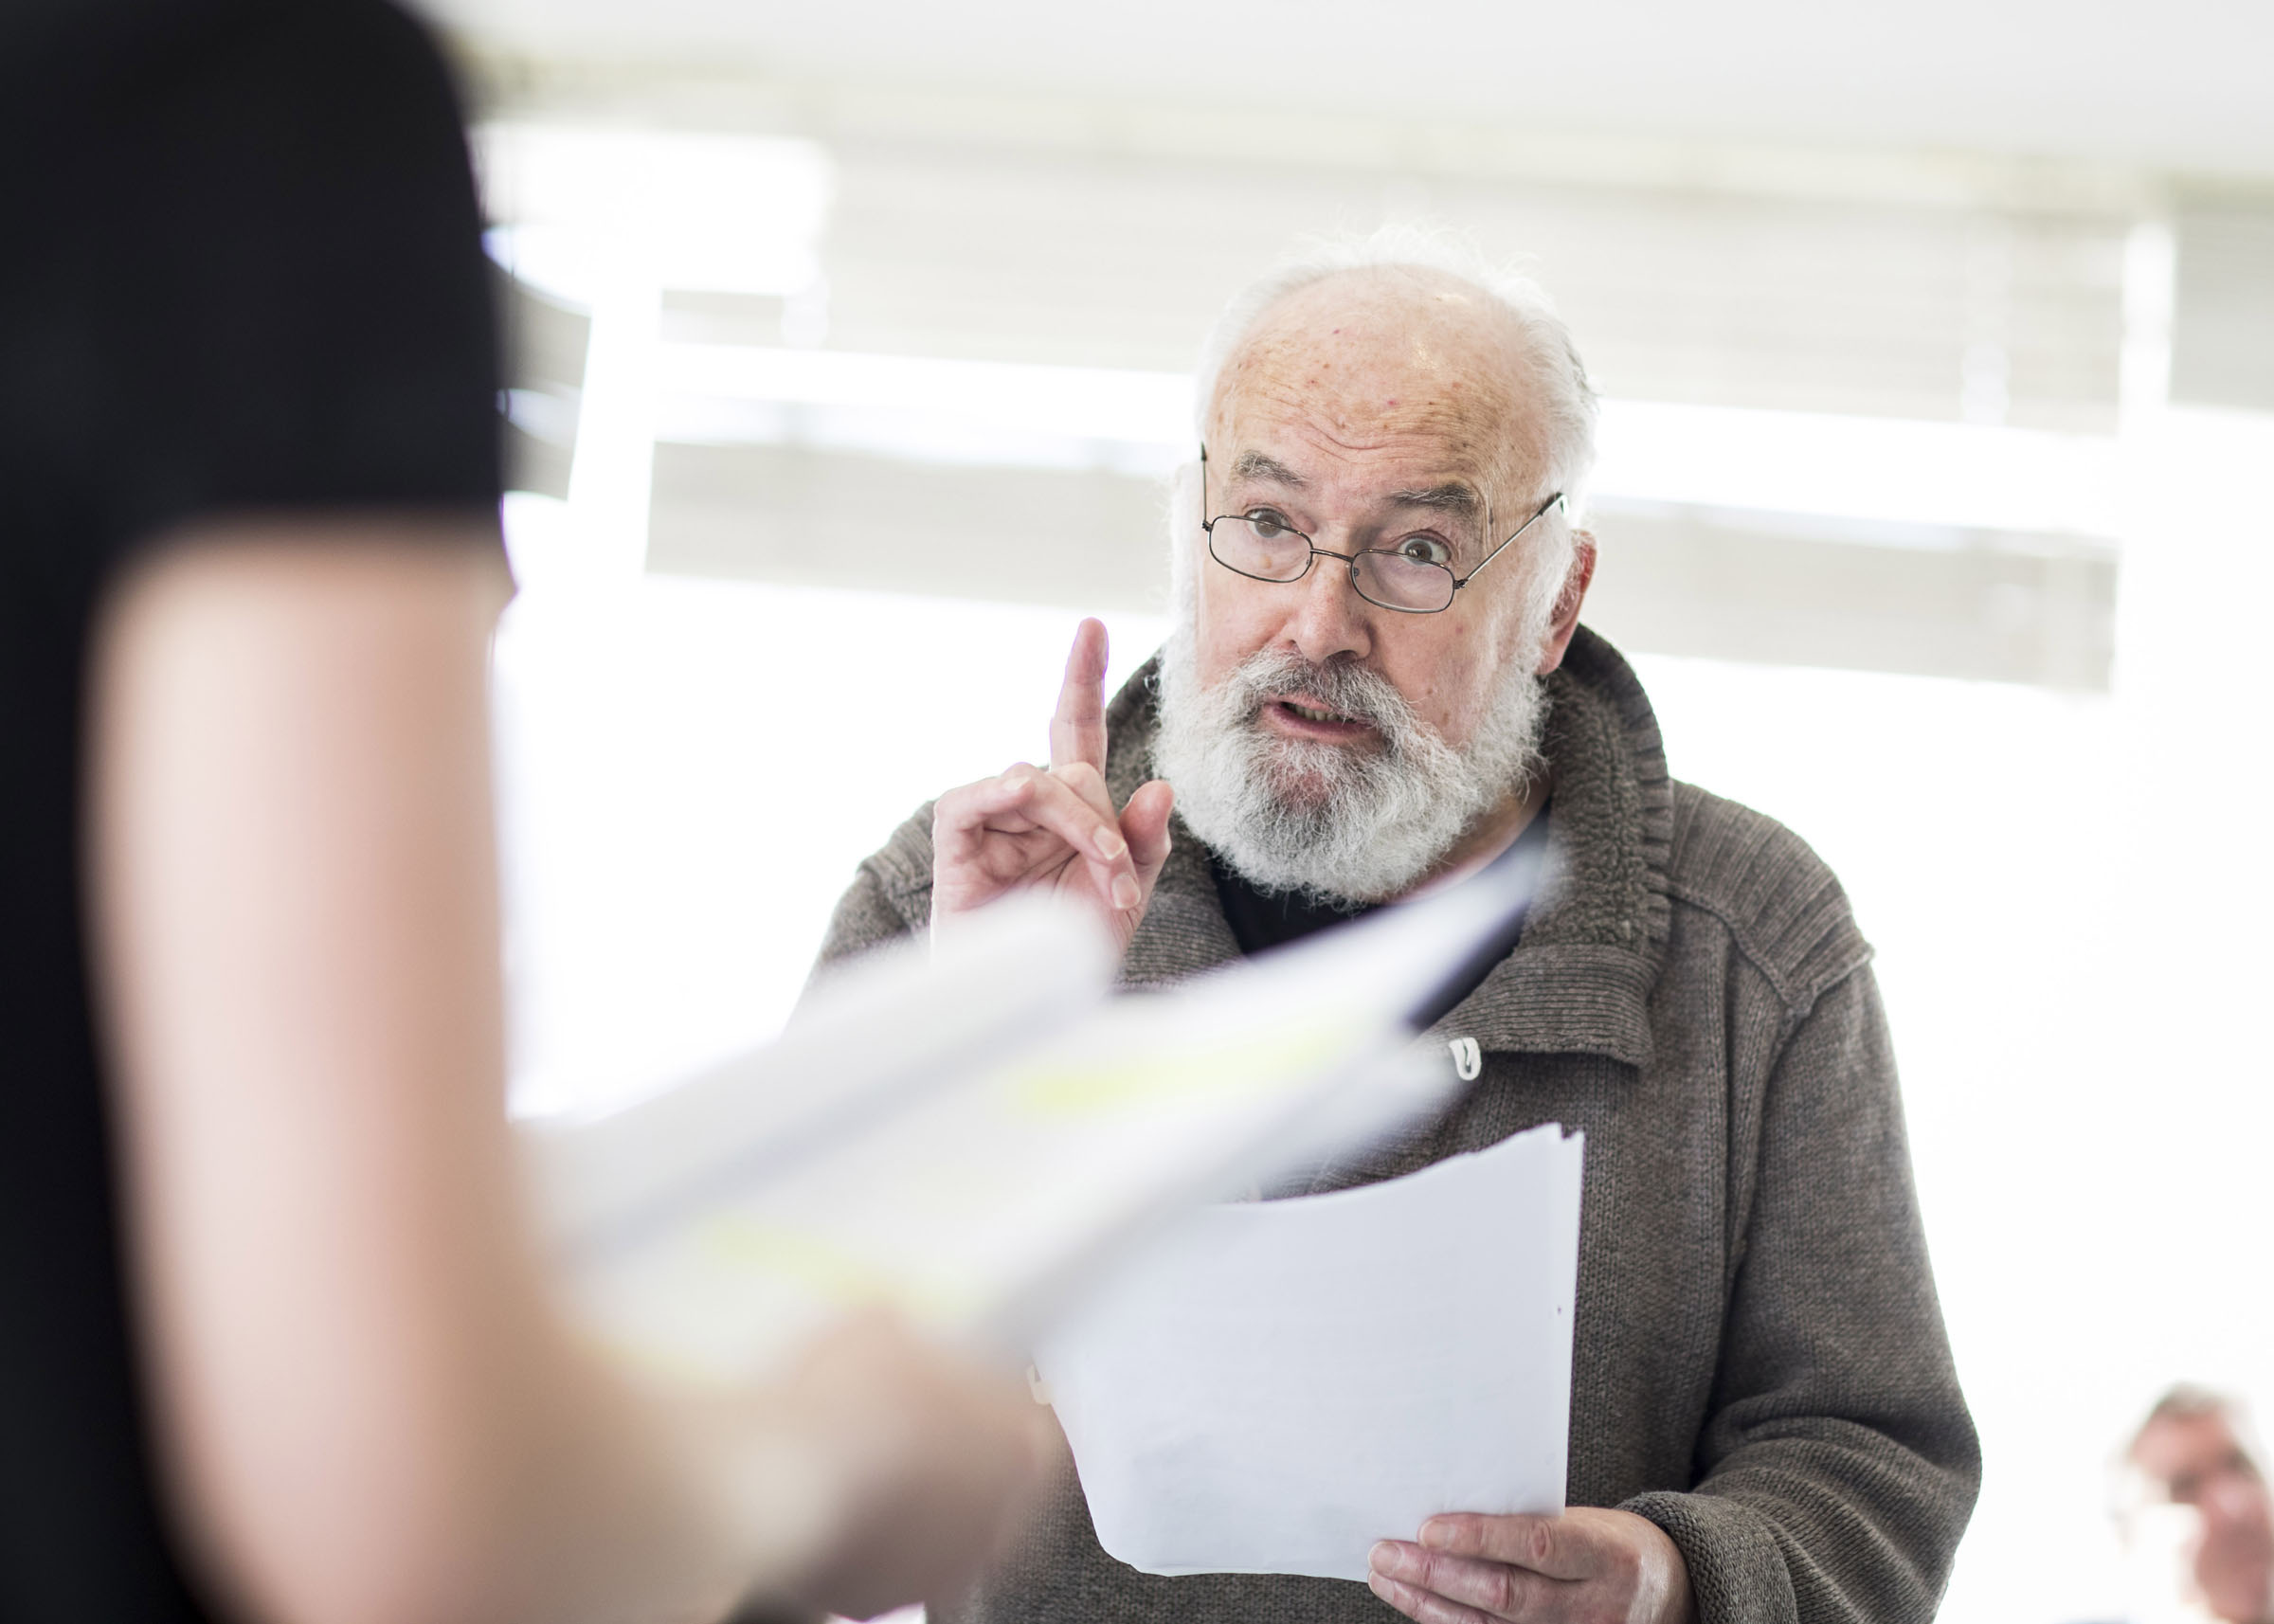 Pip Donaghy in rehearsals for the 'Lottery of Love' at The Orange Tree Theatre 